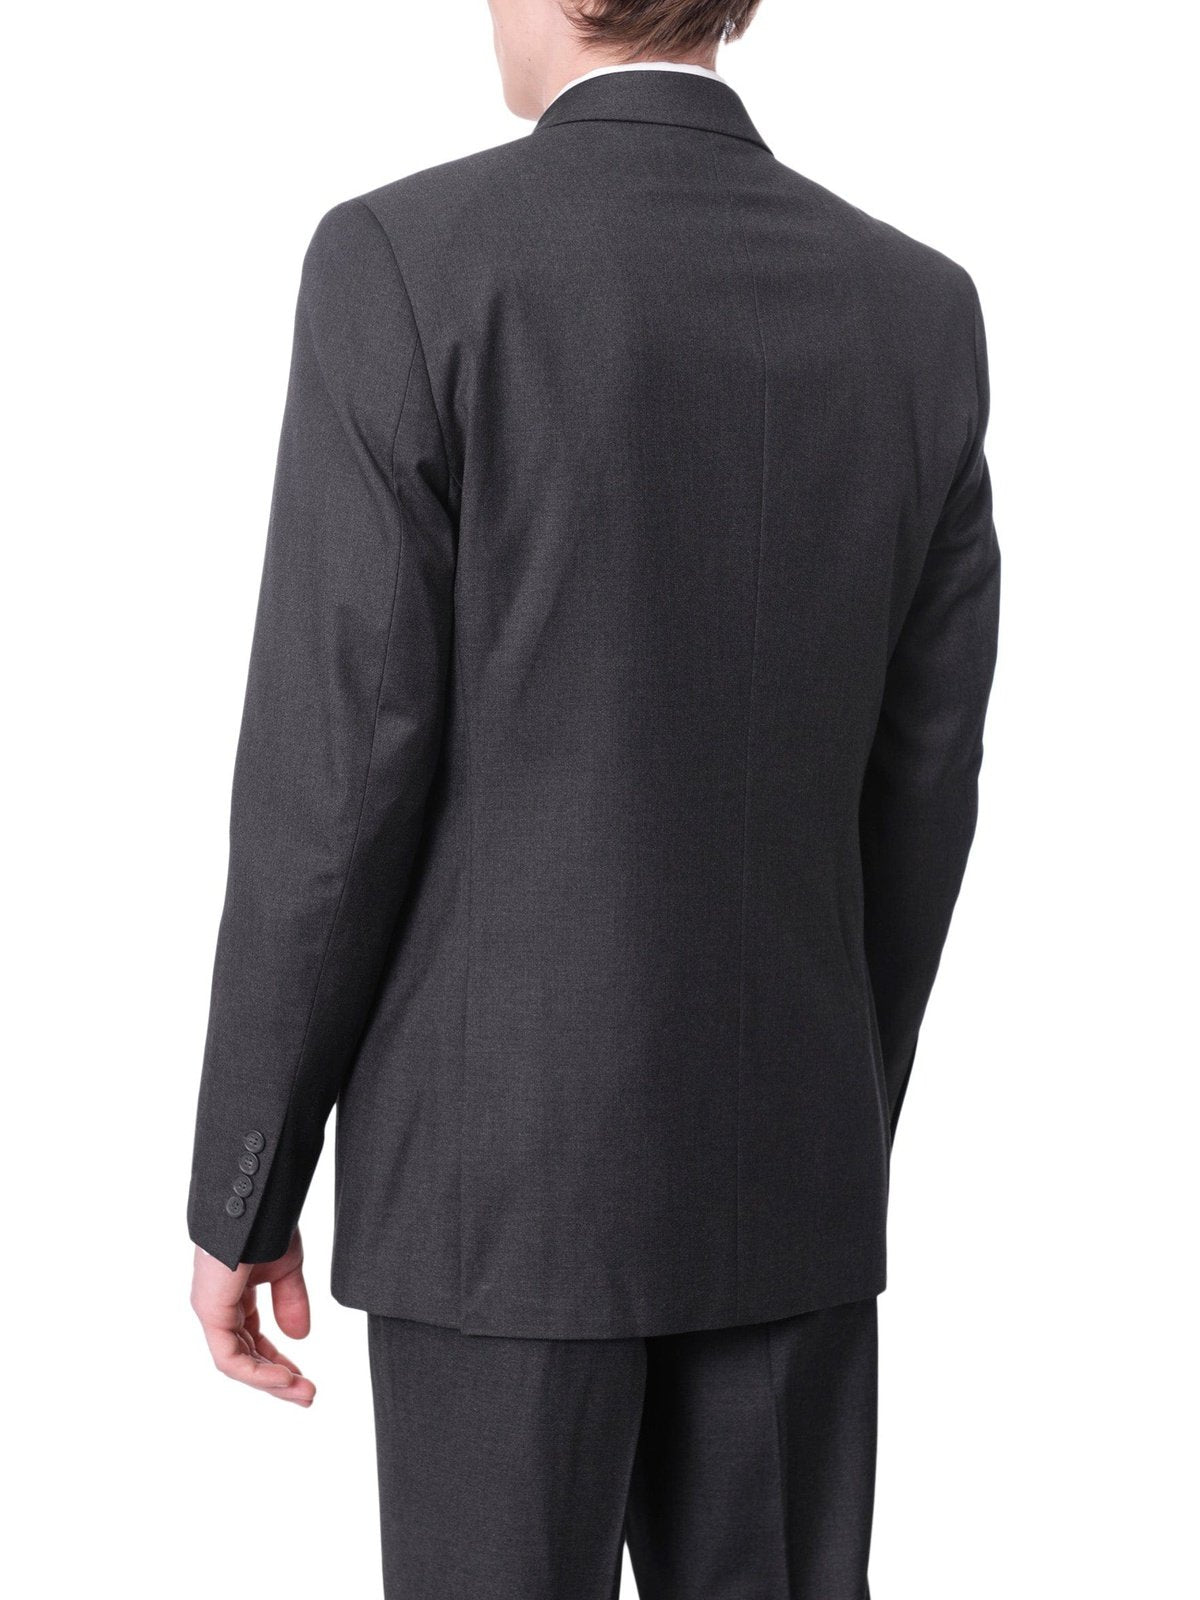 Raphael Bestselling Items Raphael Slim Fit Solid Medium Gray Two Button Suit